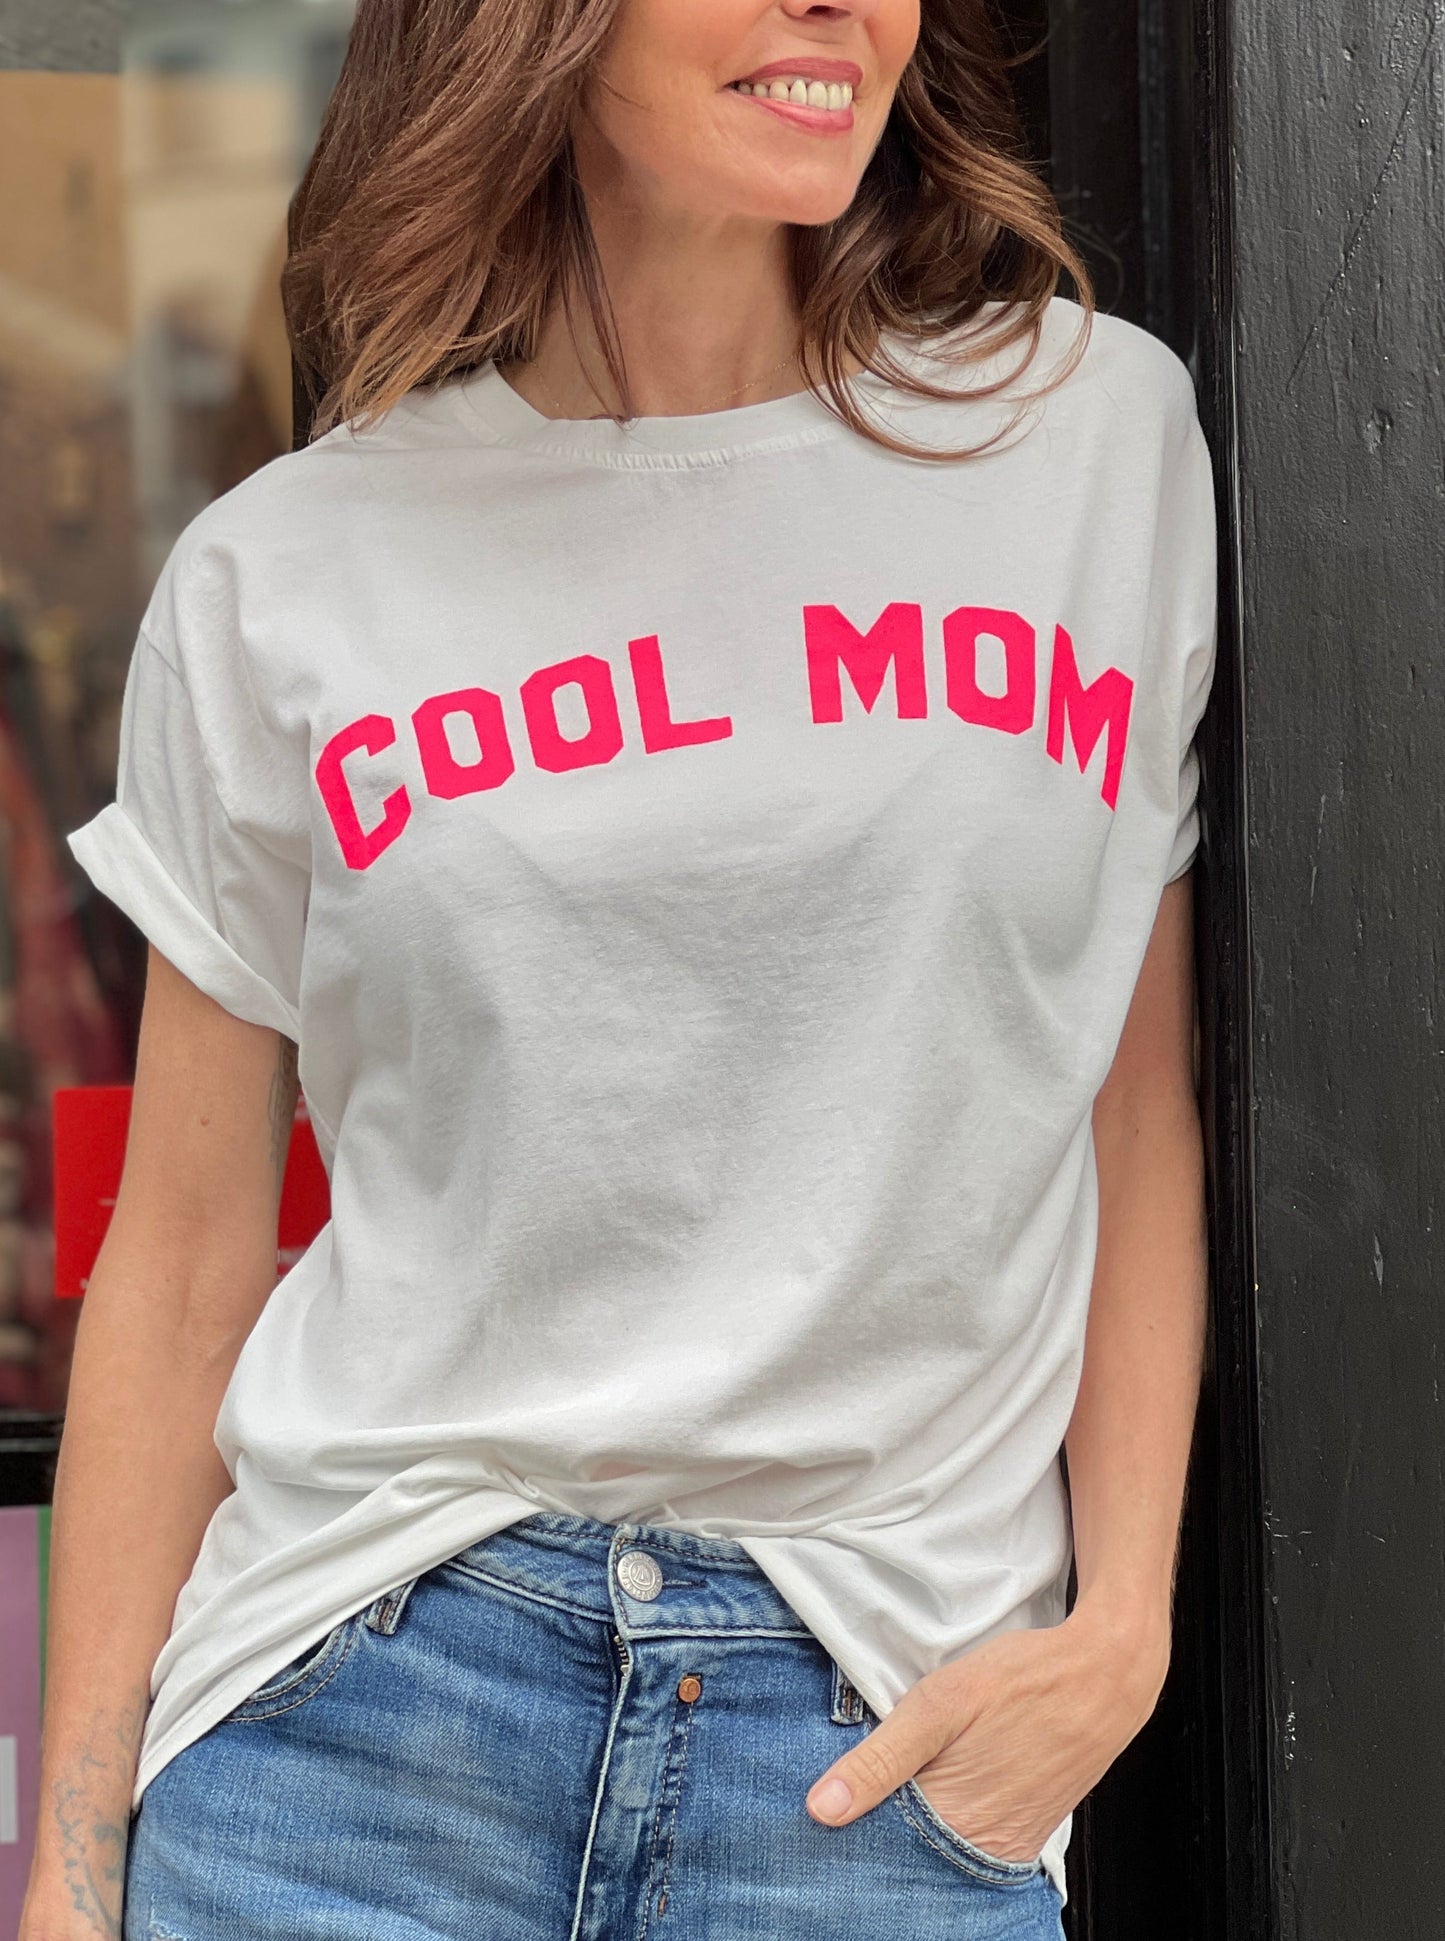 shirt-cool-mom-oversized-by-n-129-concept-store-duesseldorf